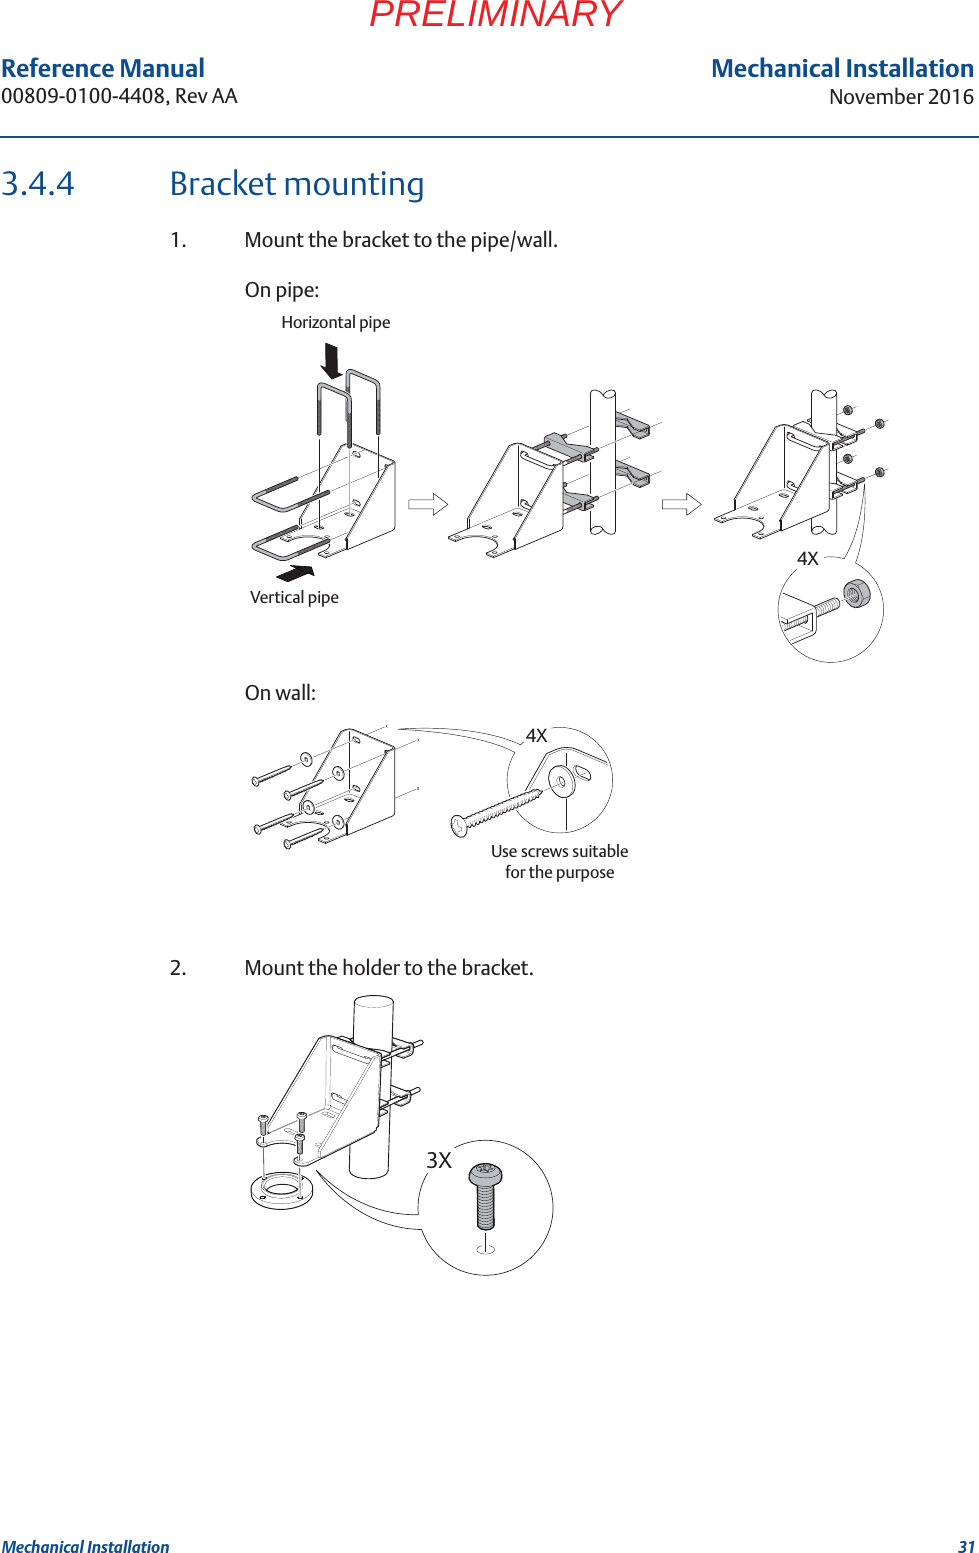 31Reference Manual 00809-0100-4408, Rev AAMechanical InstallationNovember 2016Mechanical InstallationPRELIMINARY3.4.4 Bracket mounting1. Mount the bracket to the pipe/wall.On pipe:On wall:2. Mount the holder to the bracket.4XVertical pipeHorizontal pipe4XUse screws suitable for the purpose3X